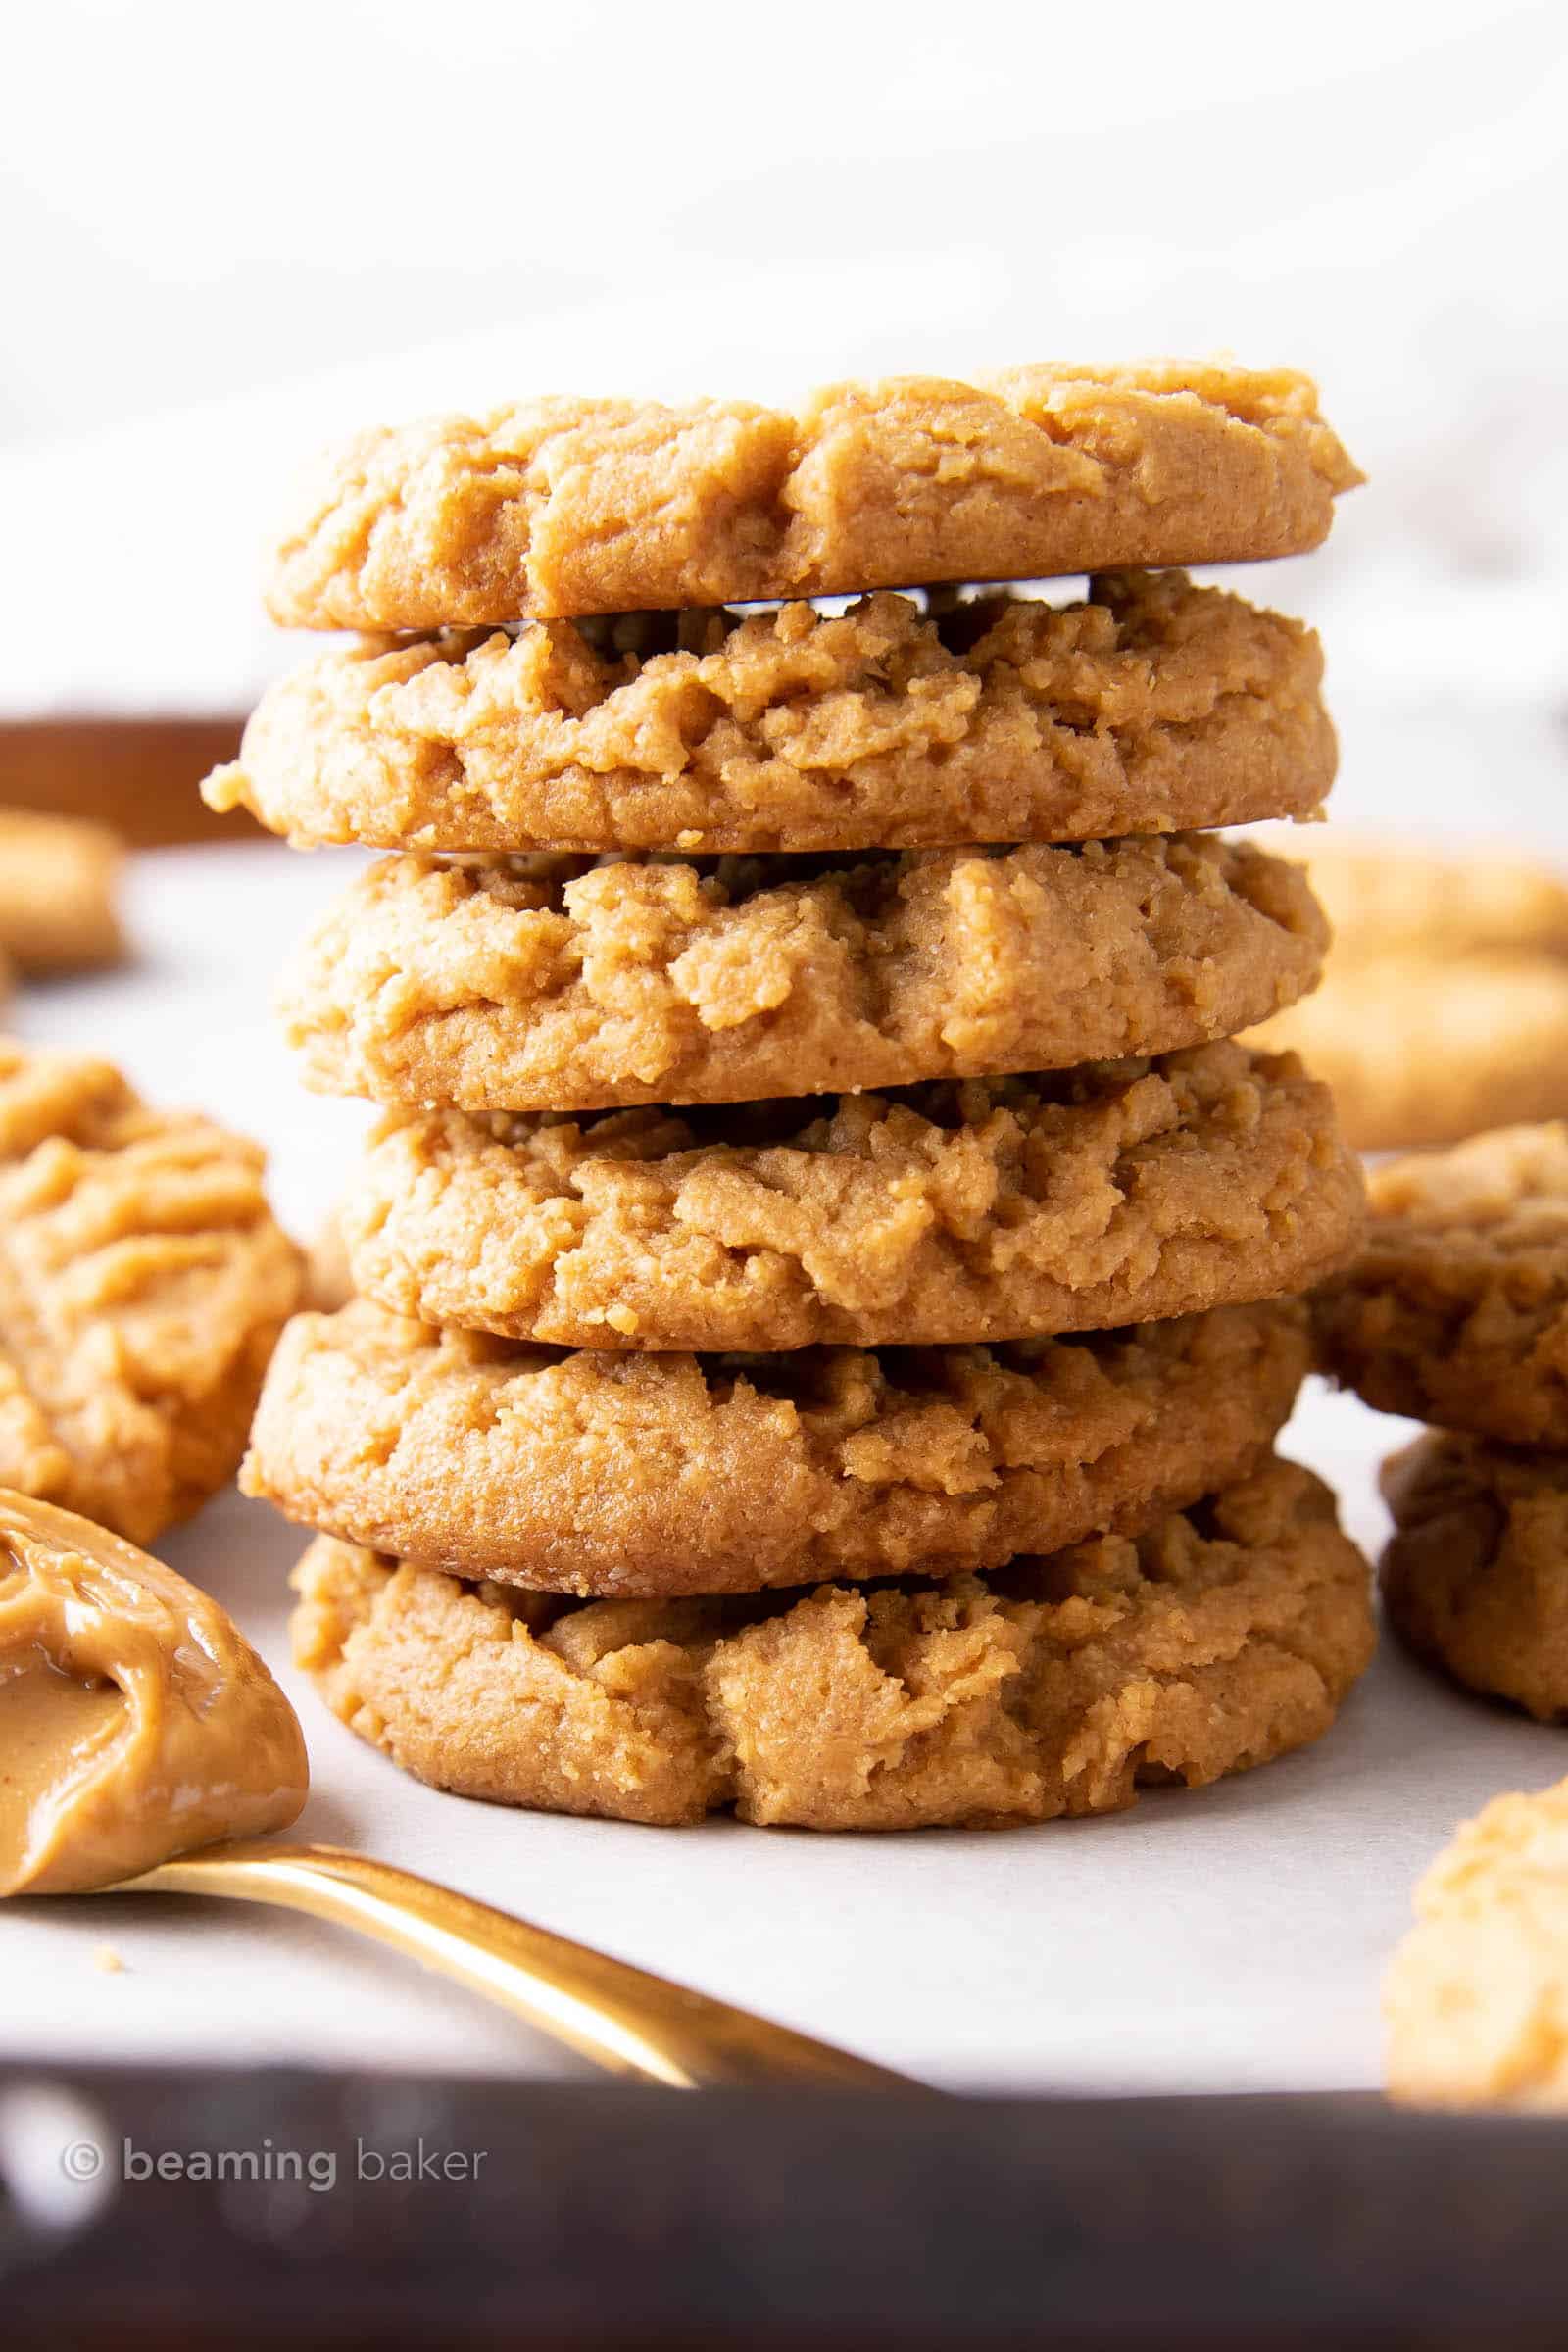 Keto Peanut Butter Cookies: this low carb peanut butter cookies recipe is made with only 4 ingredients. The best peanut butter keto cookies—only 2 net carbs and keto-friendly. #Keto #KetoCookies #PeanutButter #LowCarb | Recipe at BeamingBaker.com